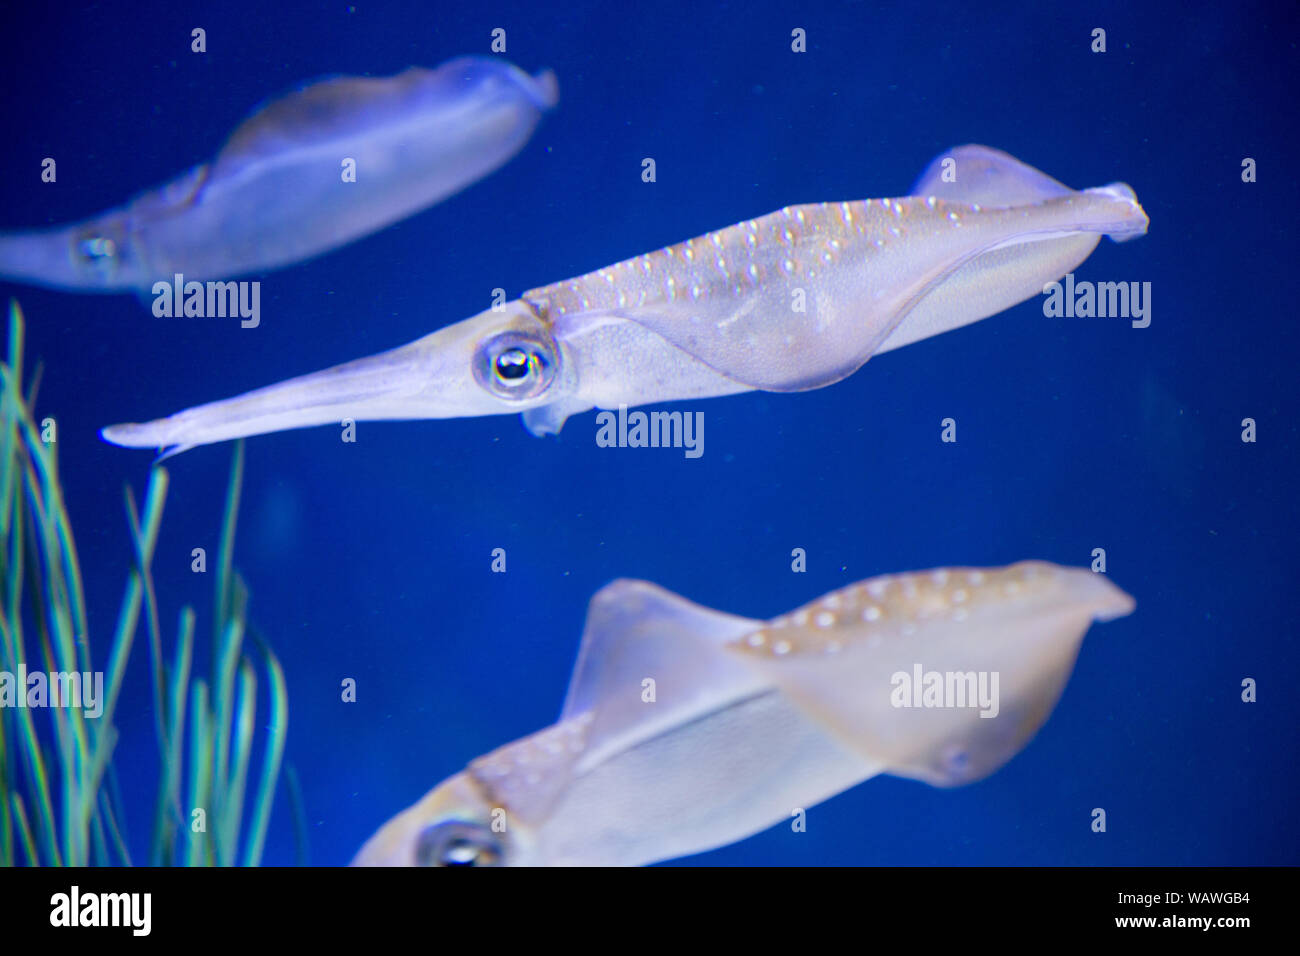 Squid highlighted in the water as they swim. Stock Photo